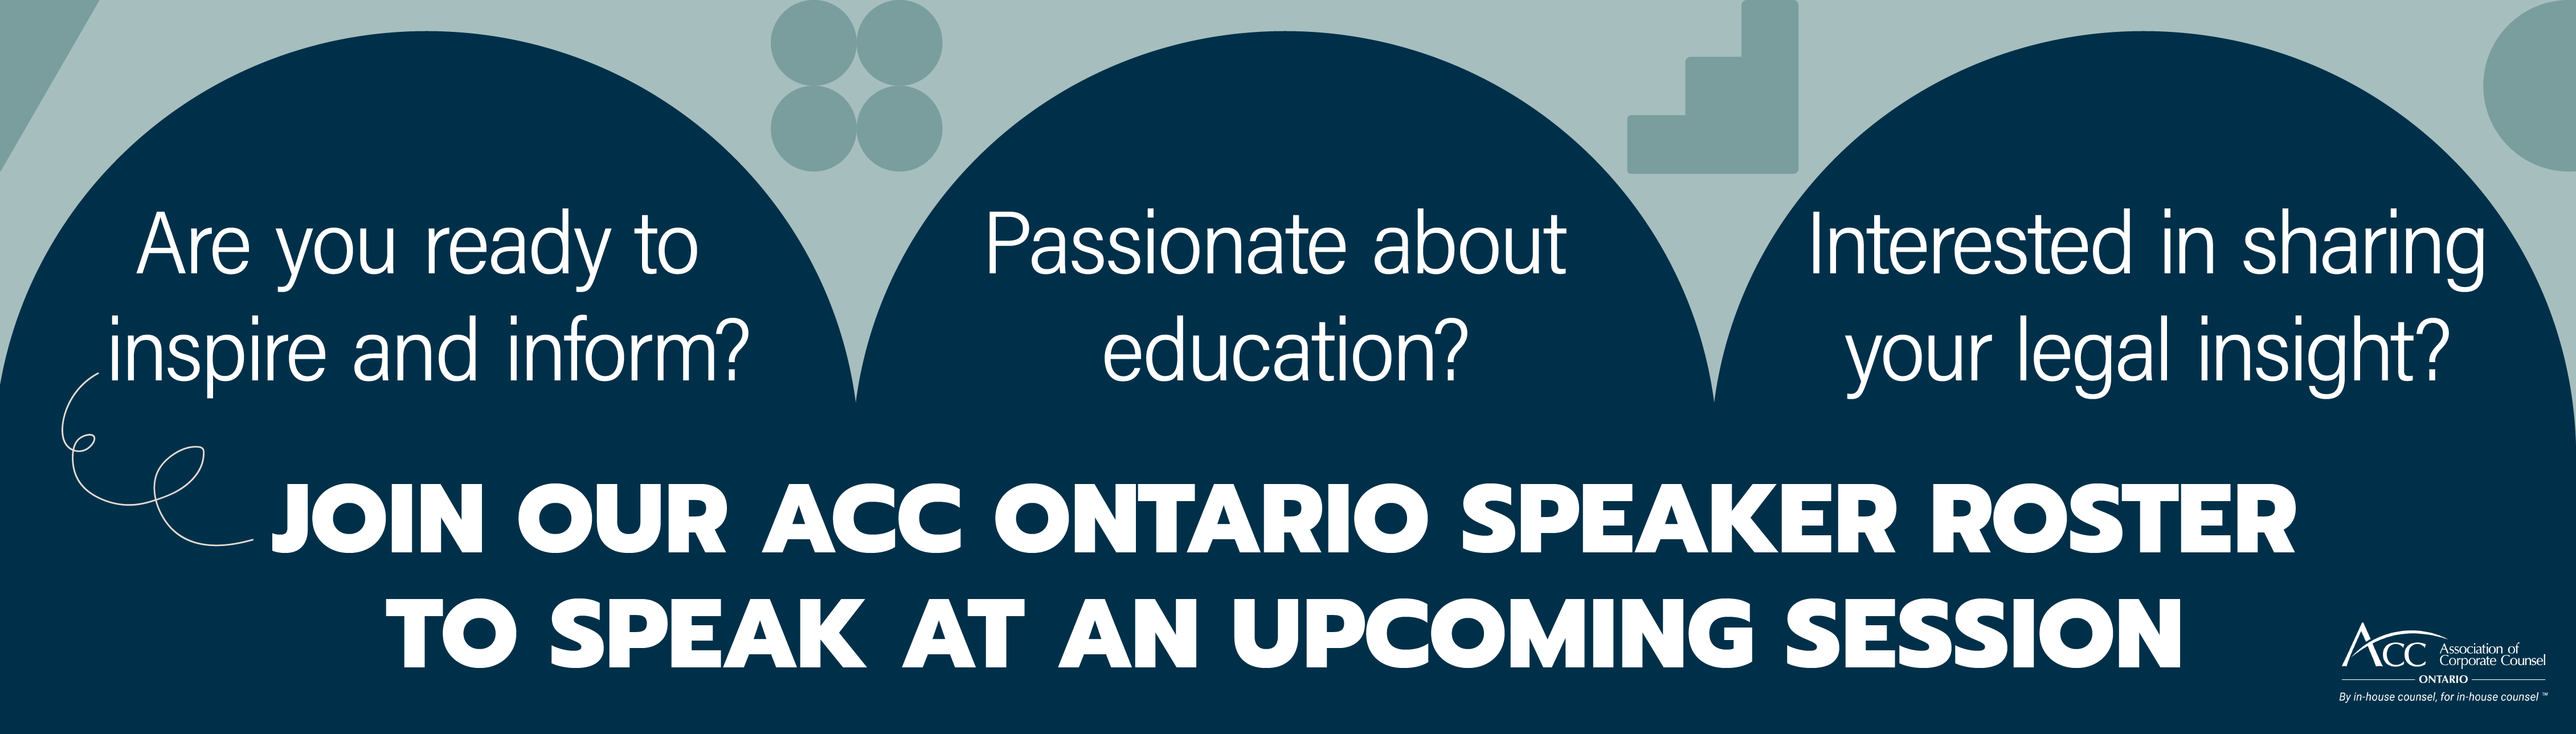 Join our ACC Ontario Speaker Roster to Speak at an upcoming session  